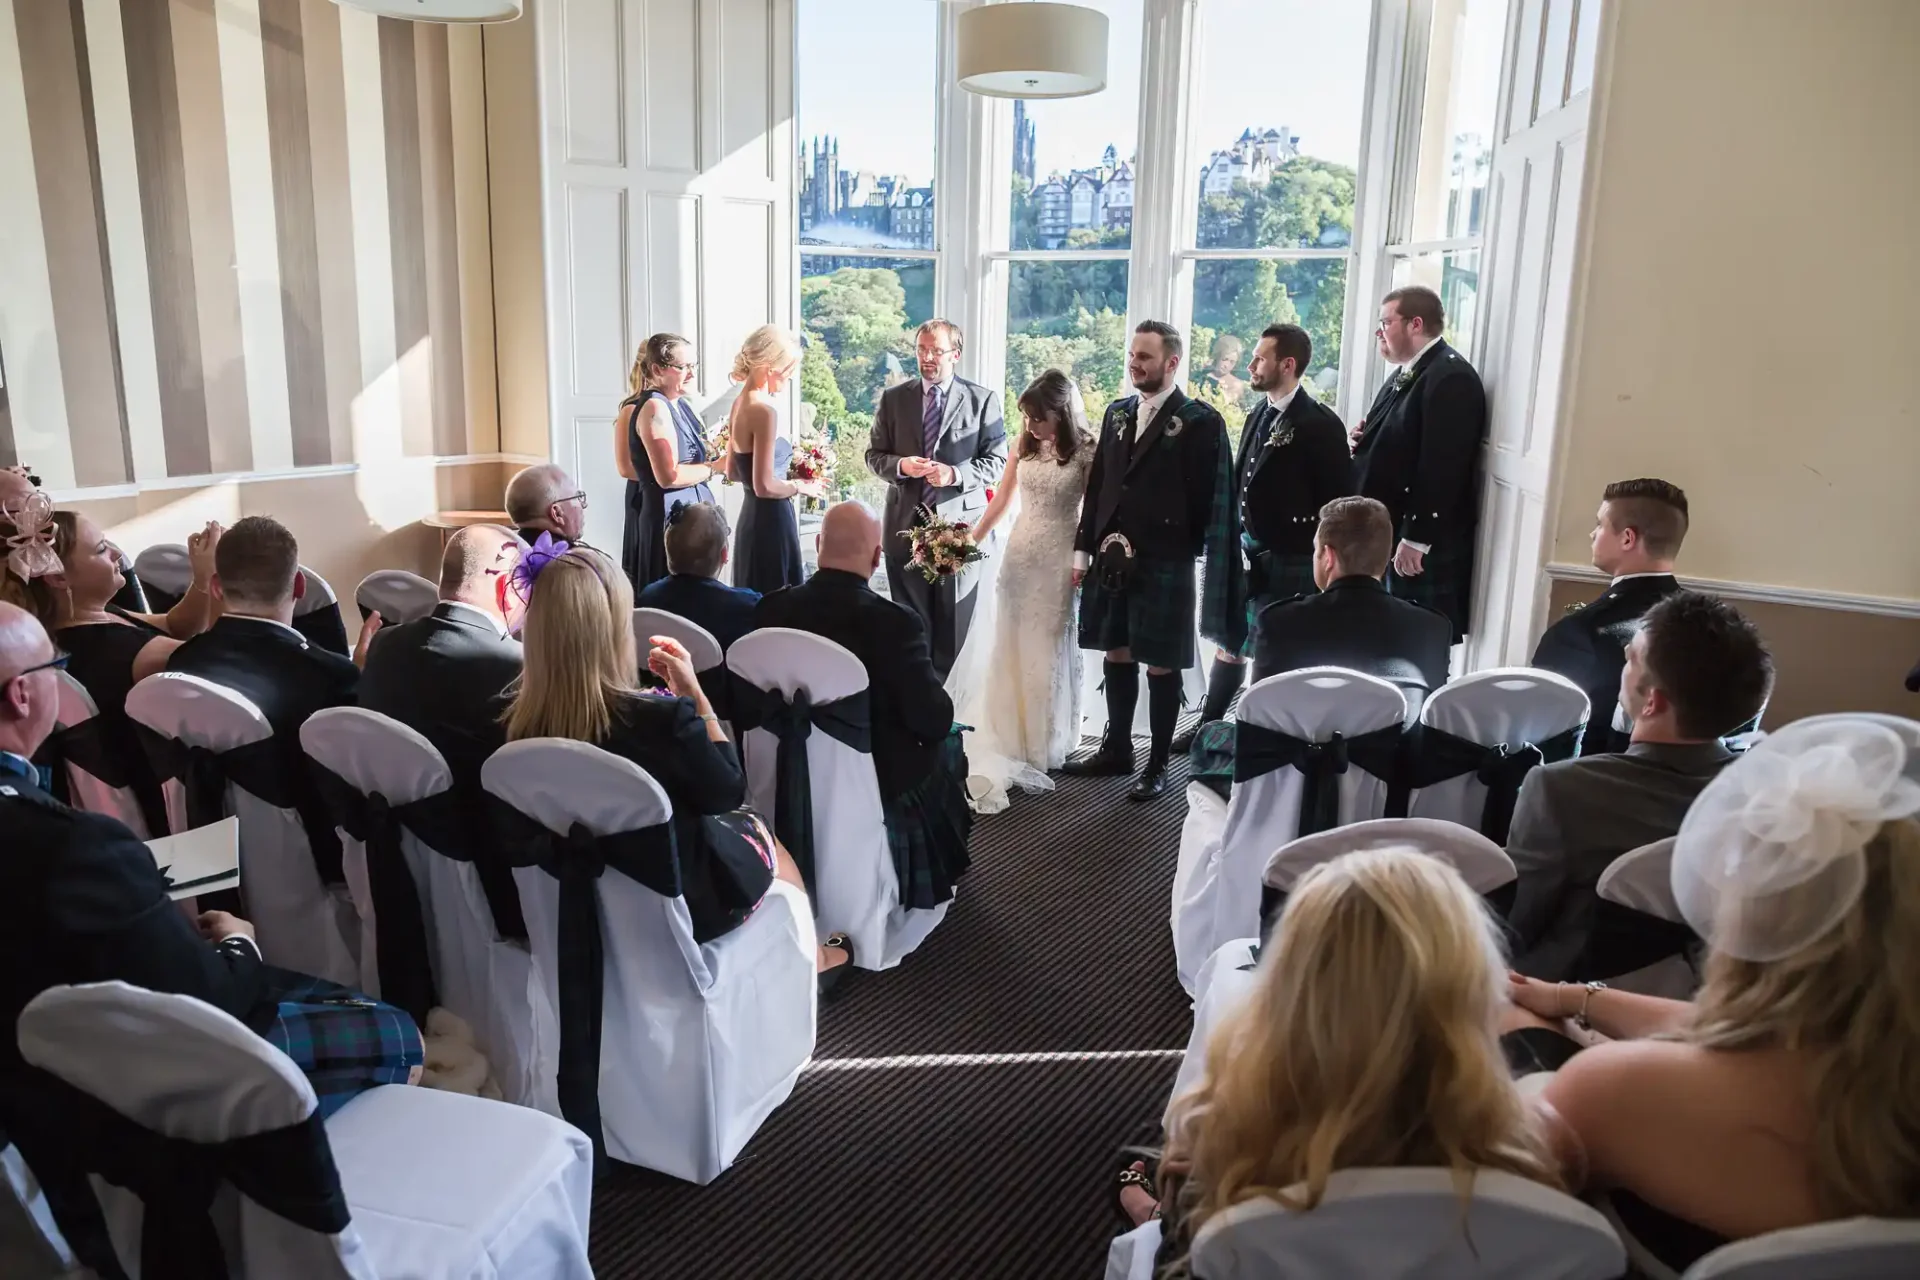 A wedding ceremony indoors with guests seated on both sides watching as the bride and groom stand at the altar, surrounded by the wedding party.